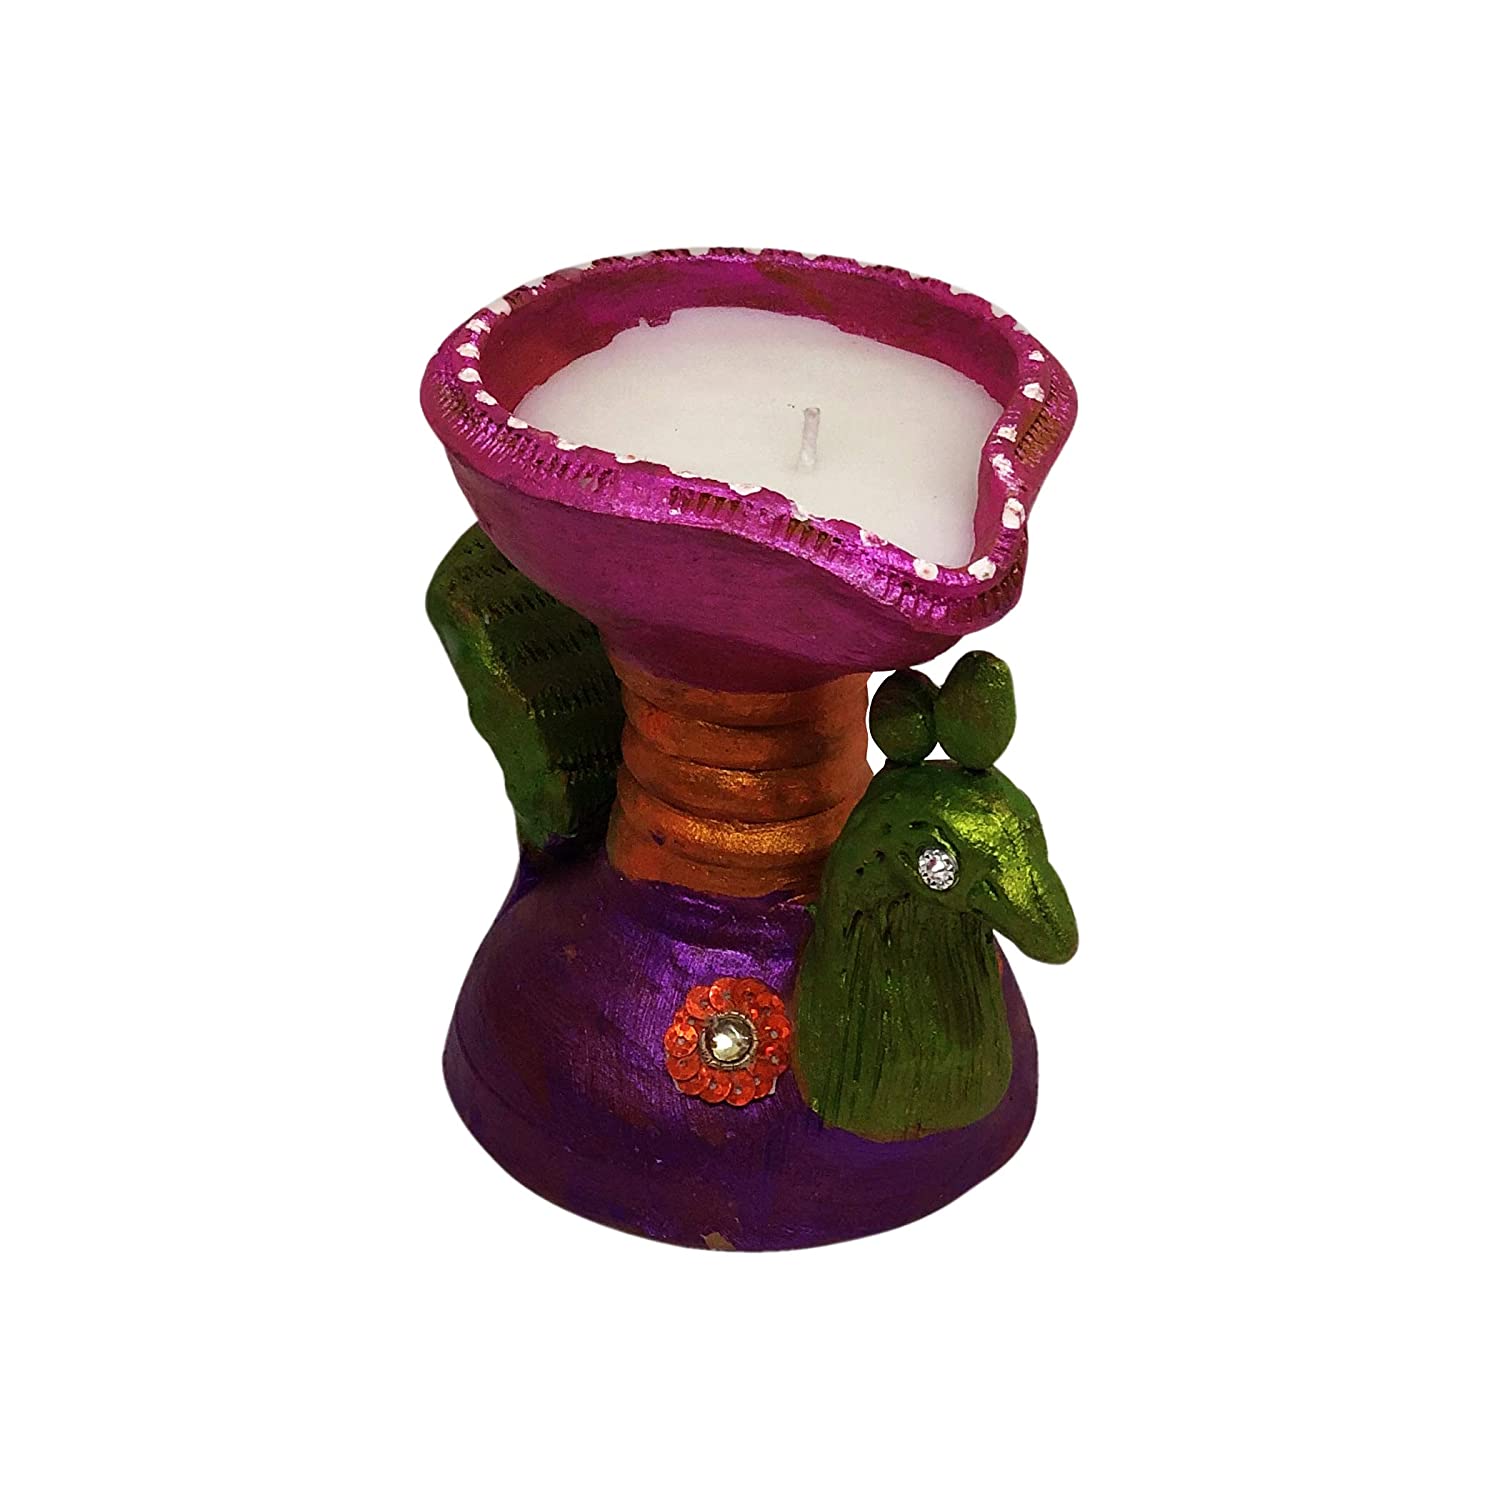 Handcrafted Bright Color Hand Painted Terracotta/Earthen Clay Decorative Diya Wax Filled Peacock Shape Diwali Diya/Candle/Tealight Holder (Size : 3x3.5x4 Inches.) 